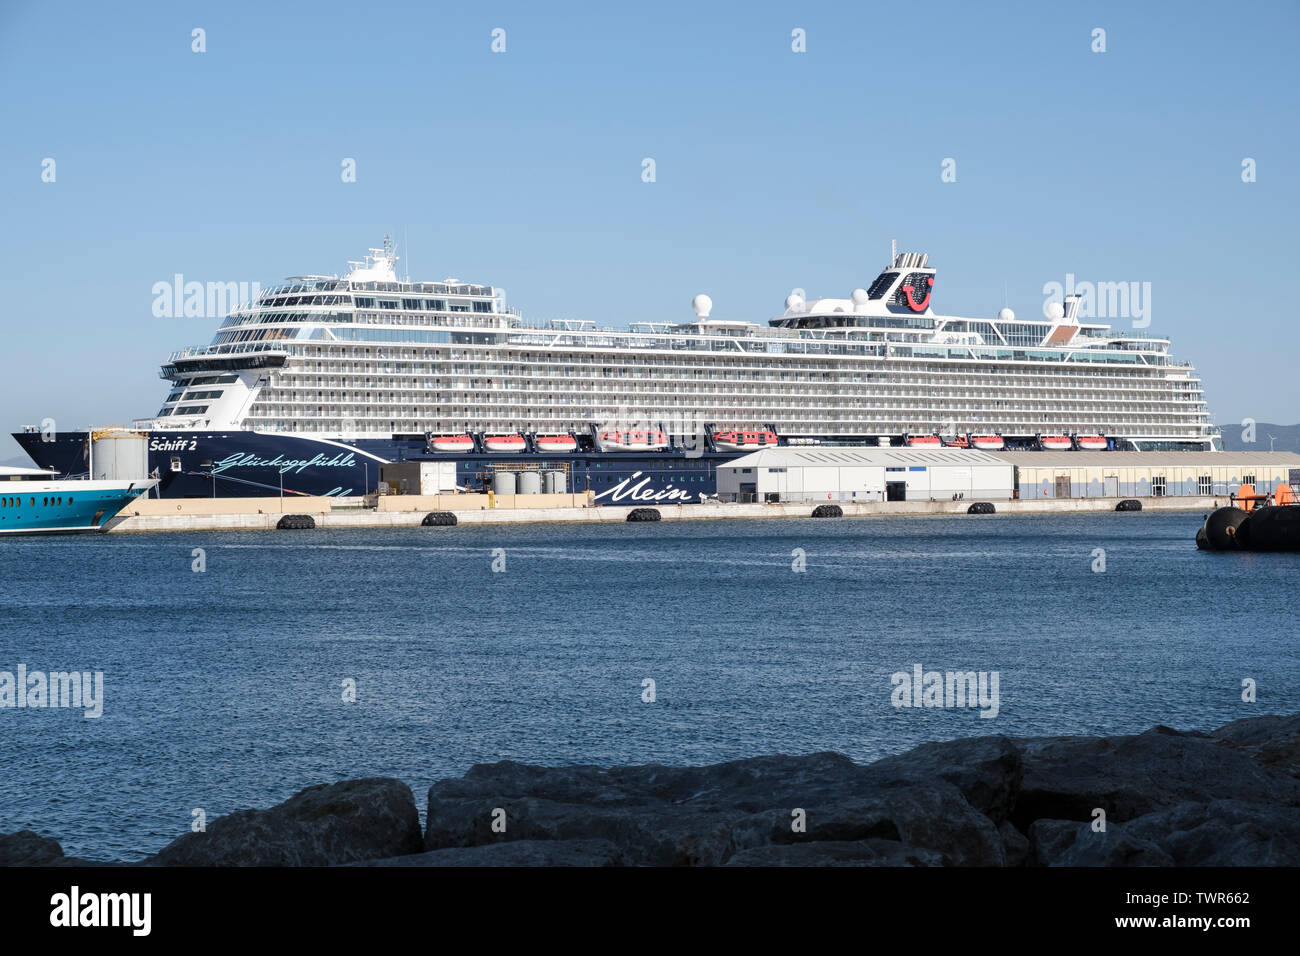 Cruise ship Mein Schiff 2 operated by TUI at berth in Gibraltar Stock Photo